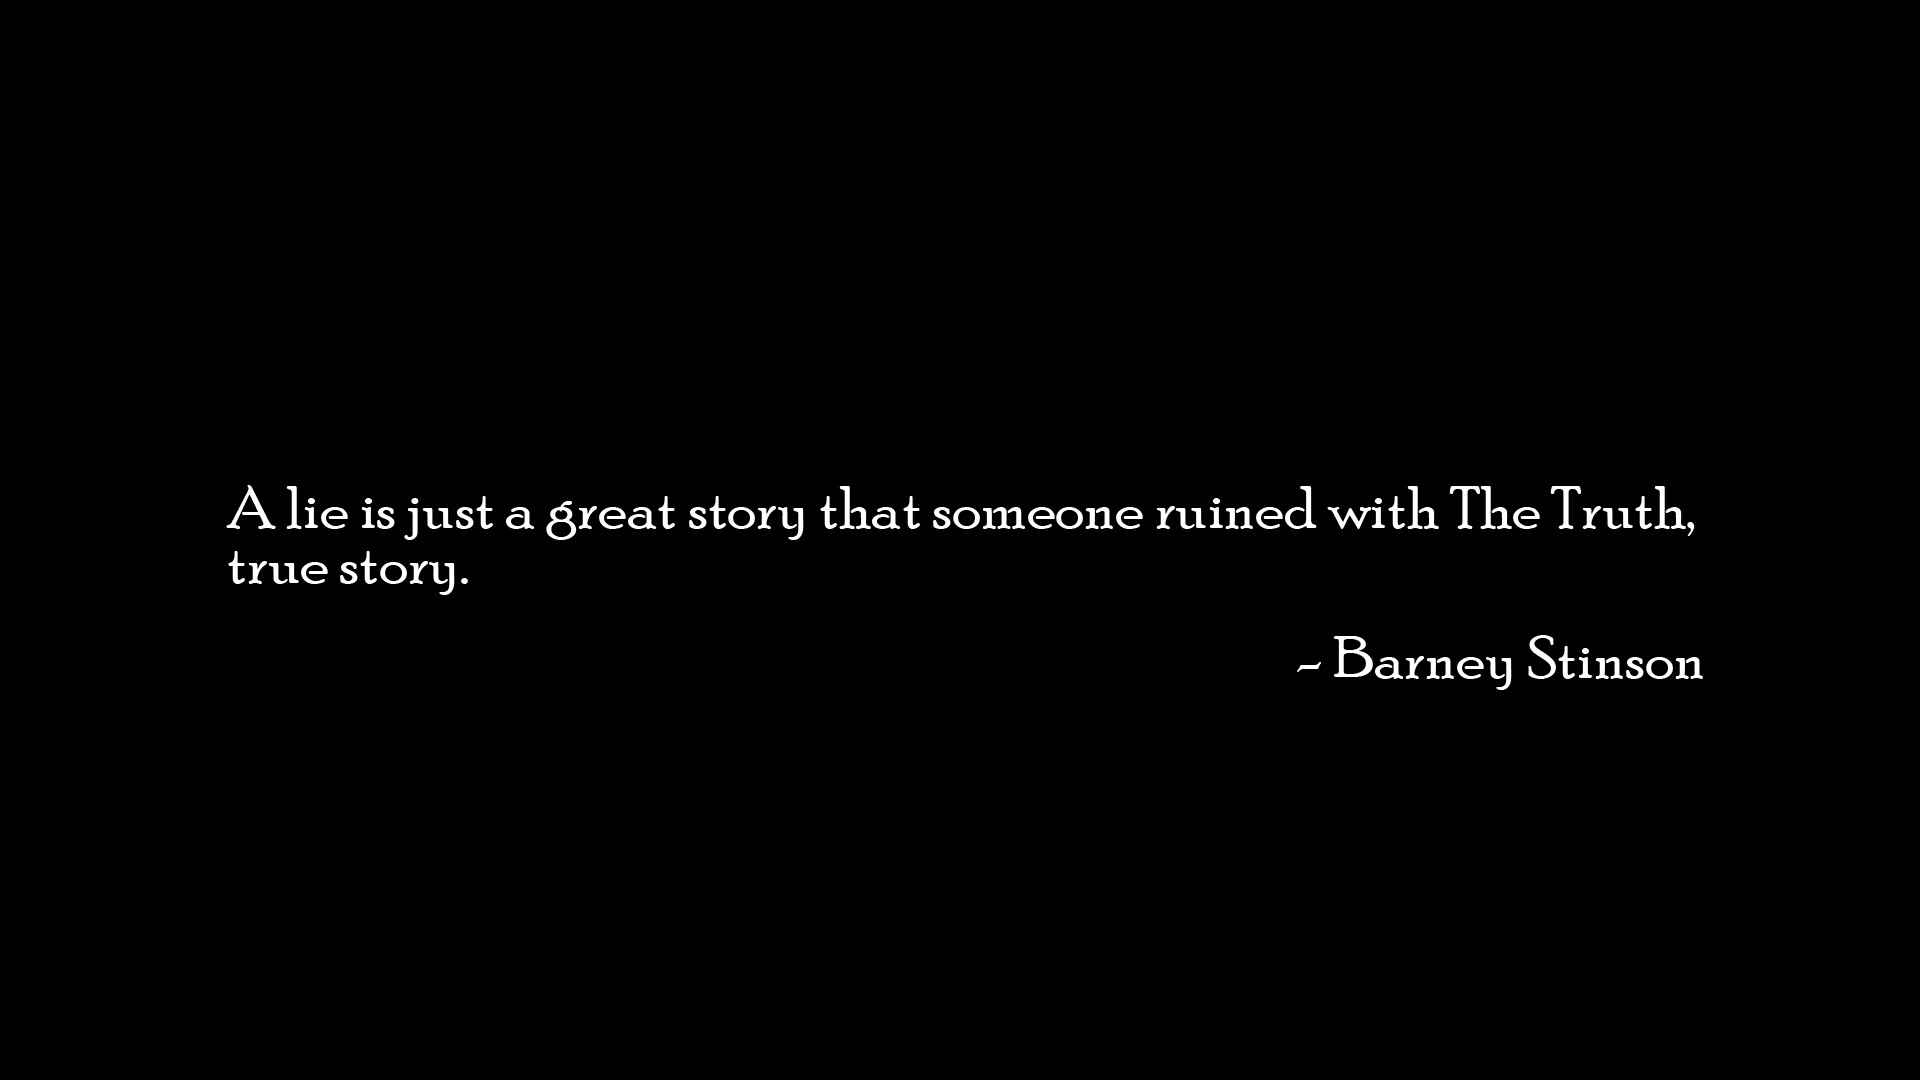 1920x1080 Quotes By Barney Stinson 14 Barney Stinson Quotes For Life !! – Blog Of Life